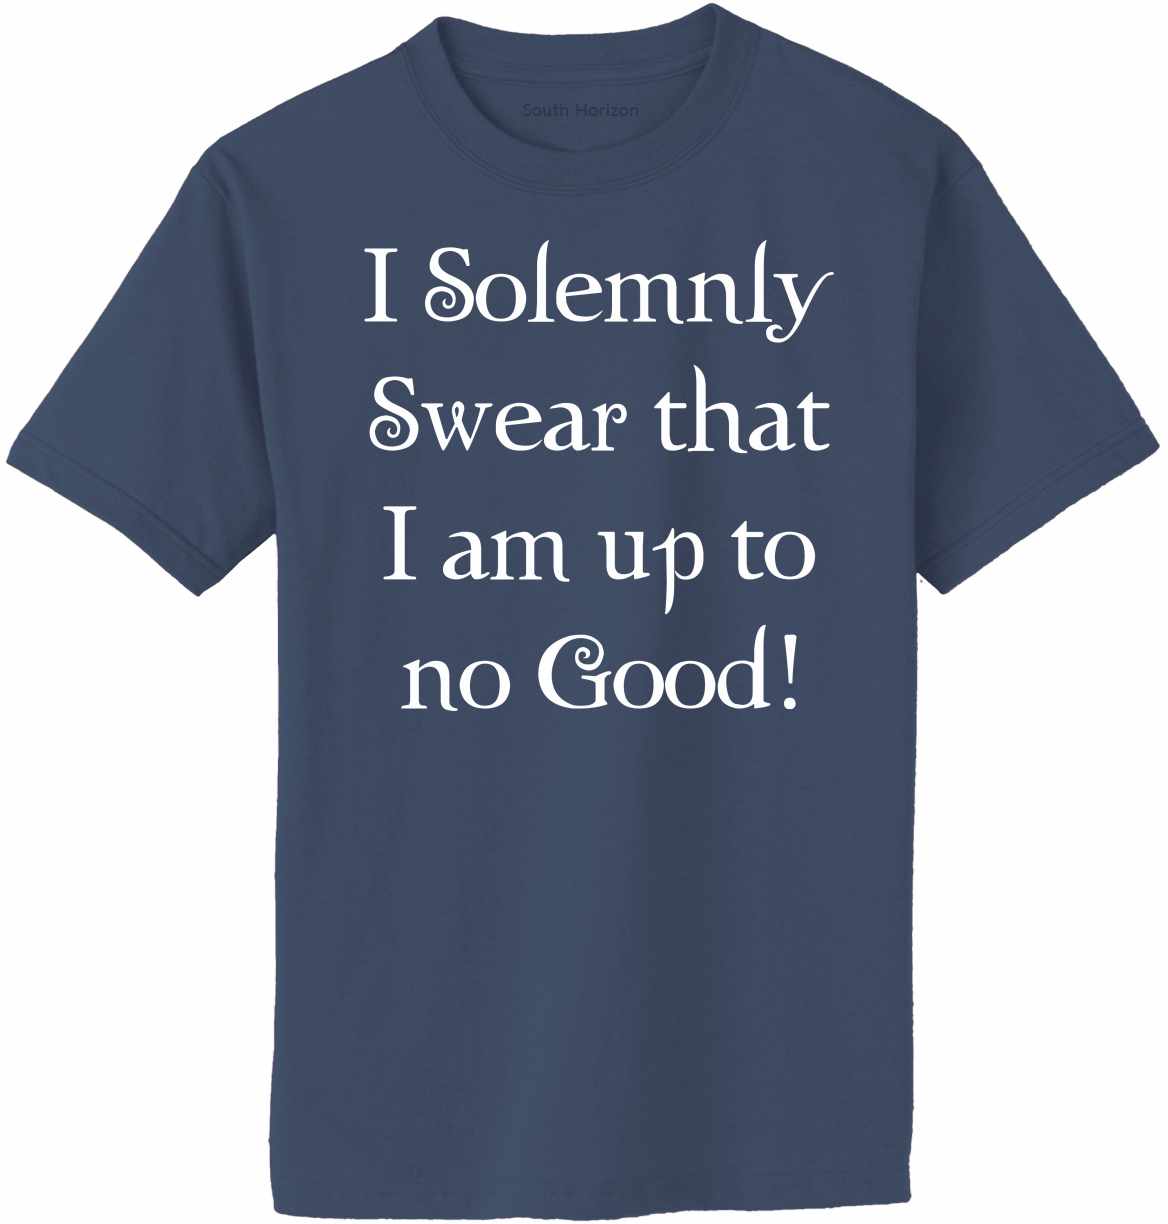 I Solemnly Swear that I am up to No Good! Adult T-Shirt (#739-1)